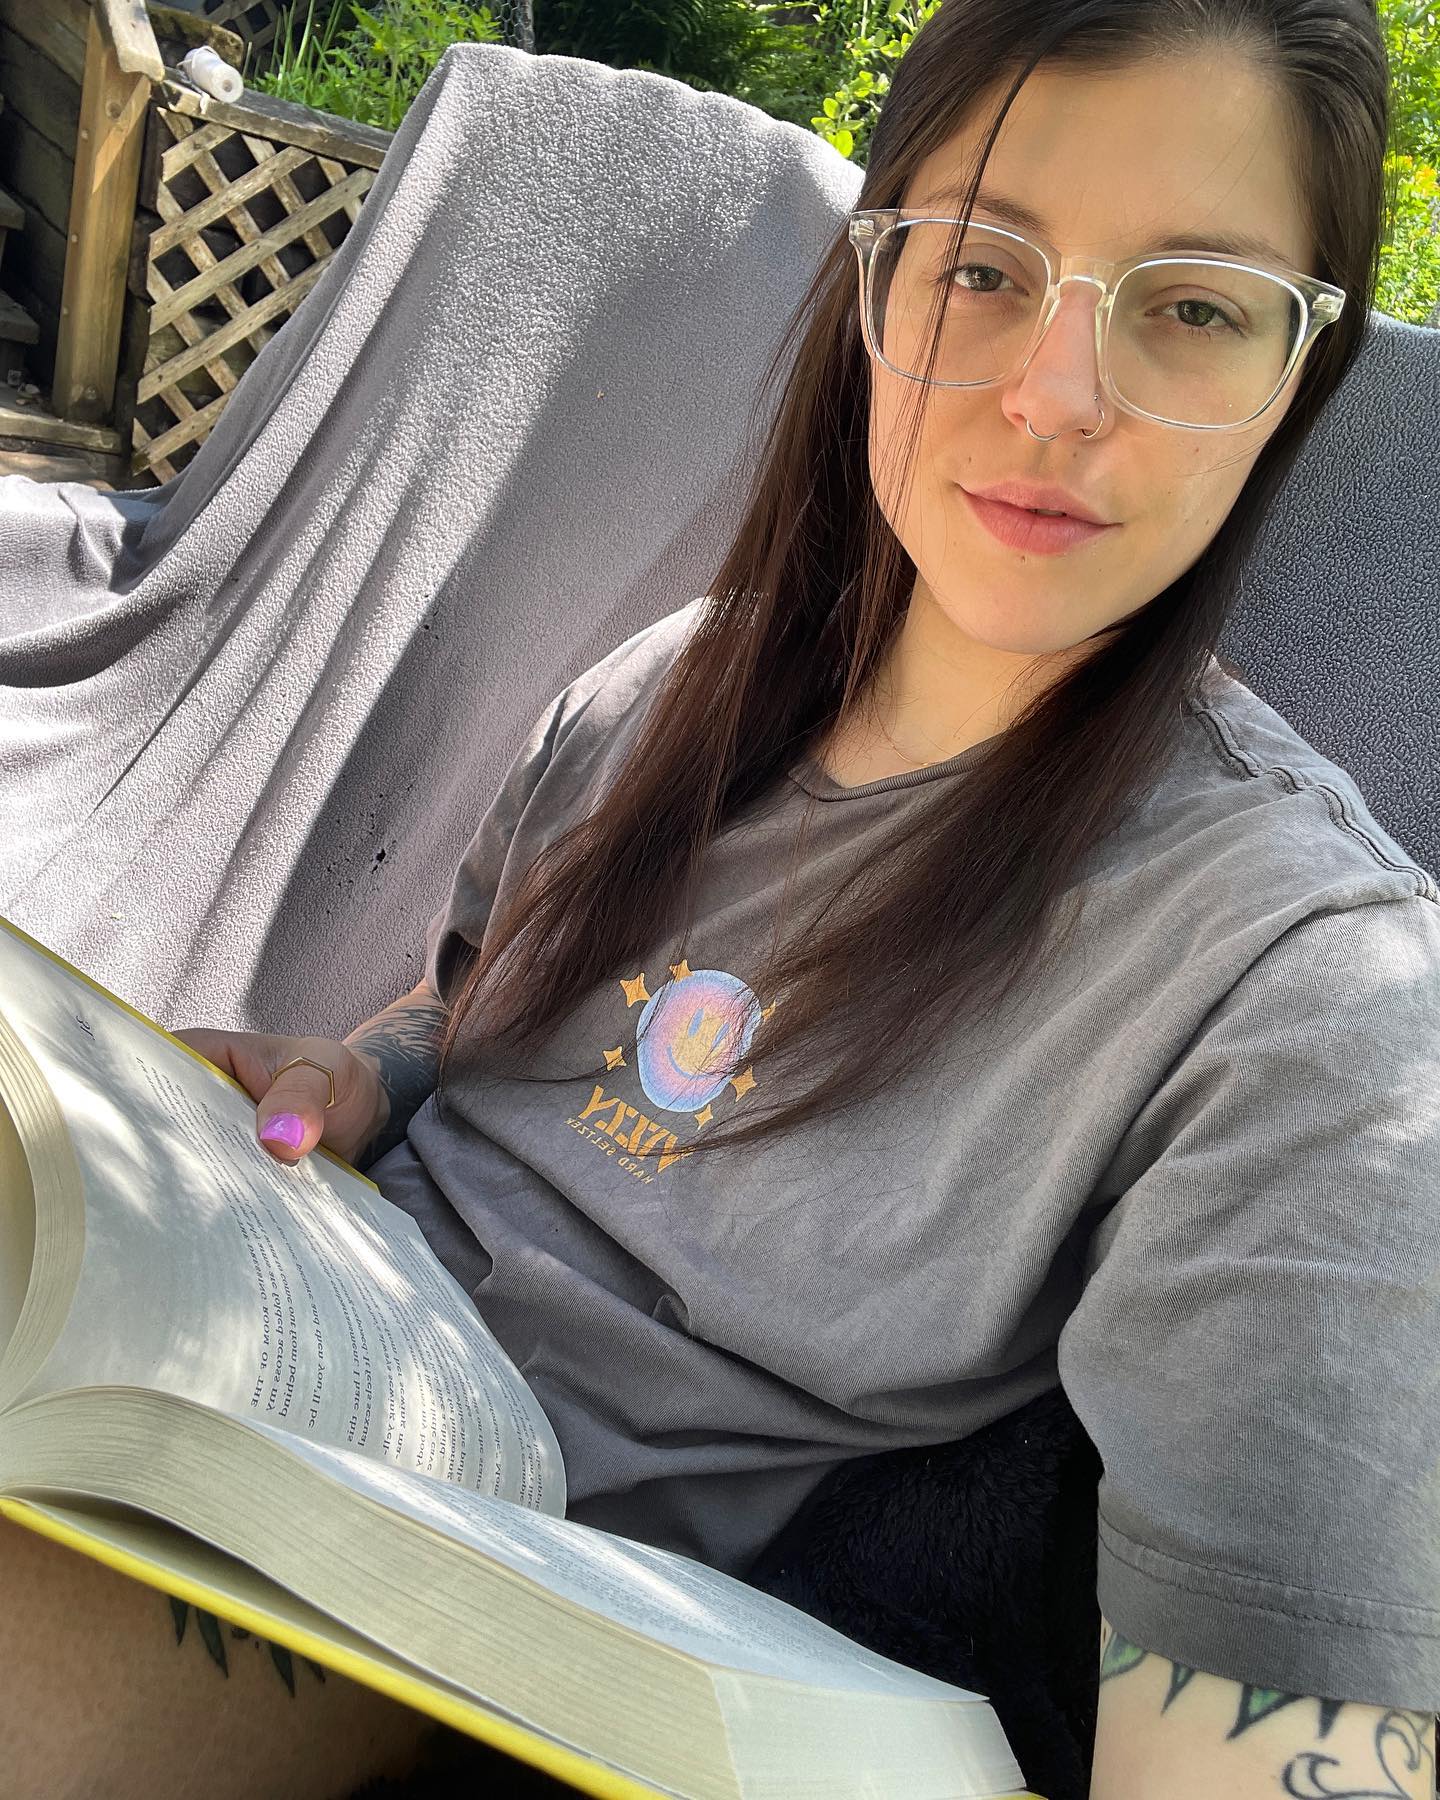 Extra baked and reading outside🥰 #books #imgladmymomdied